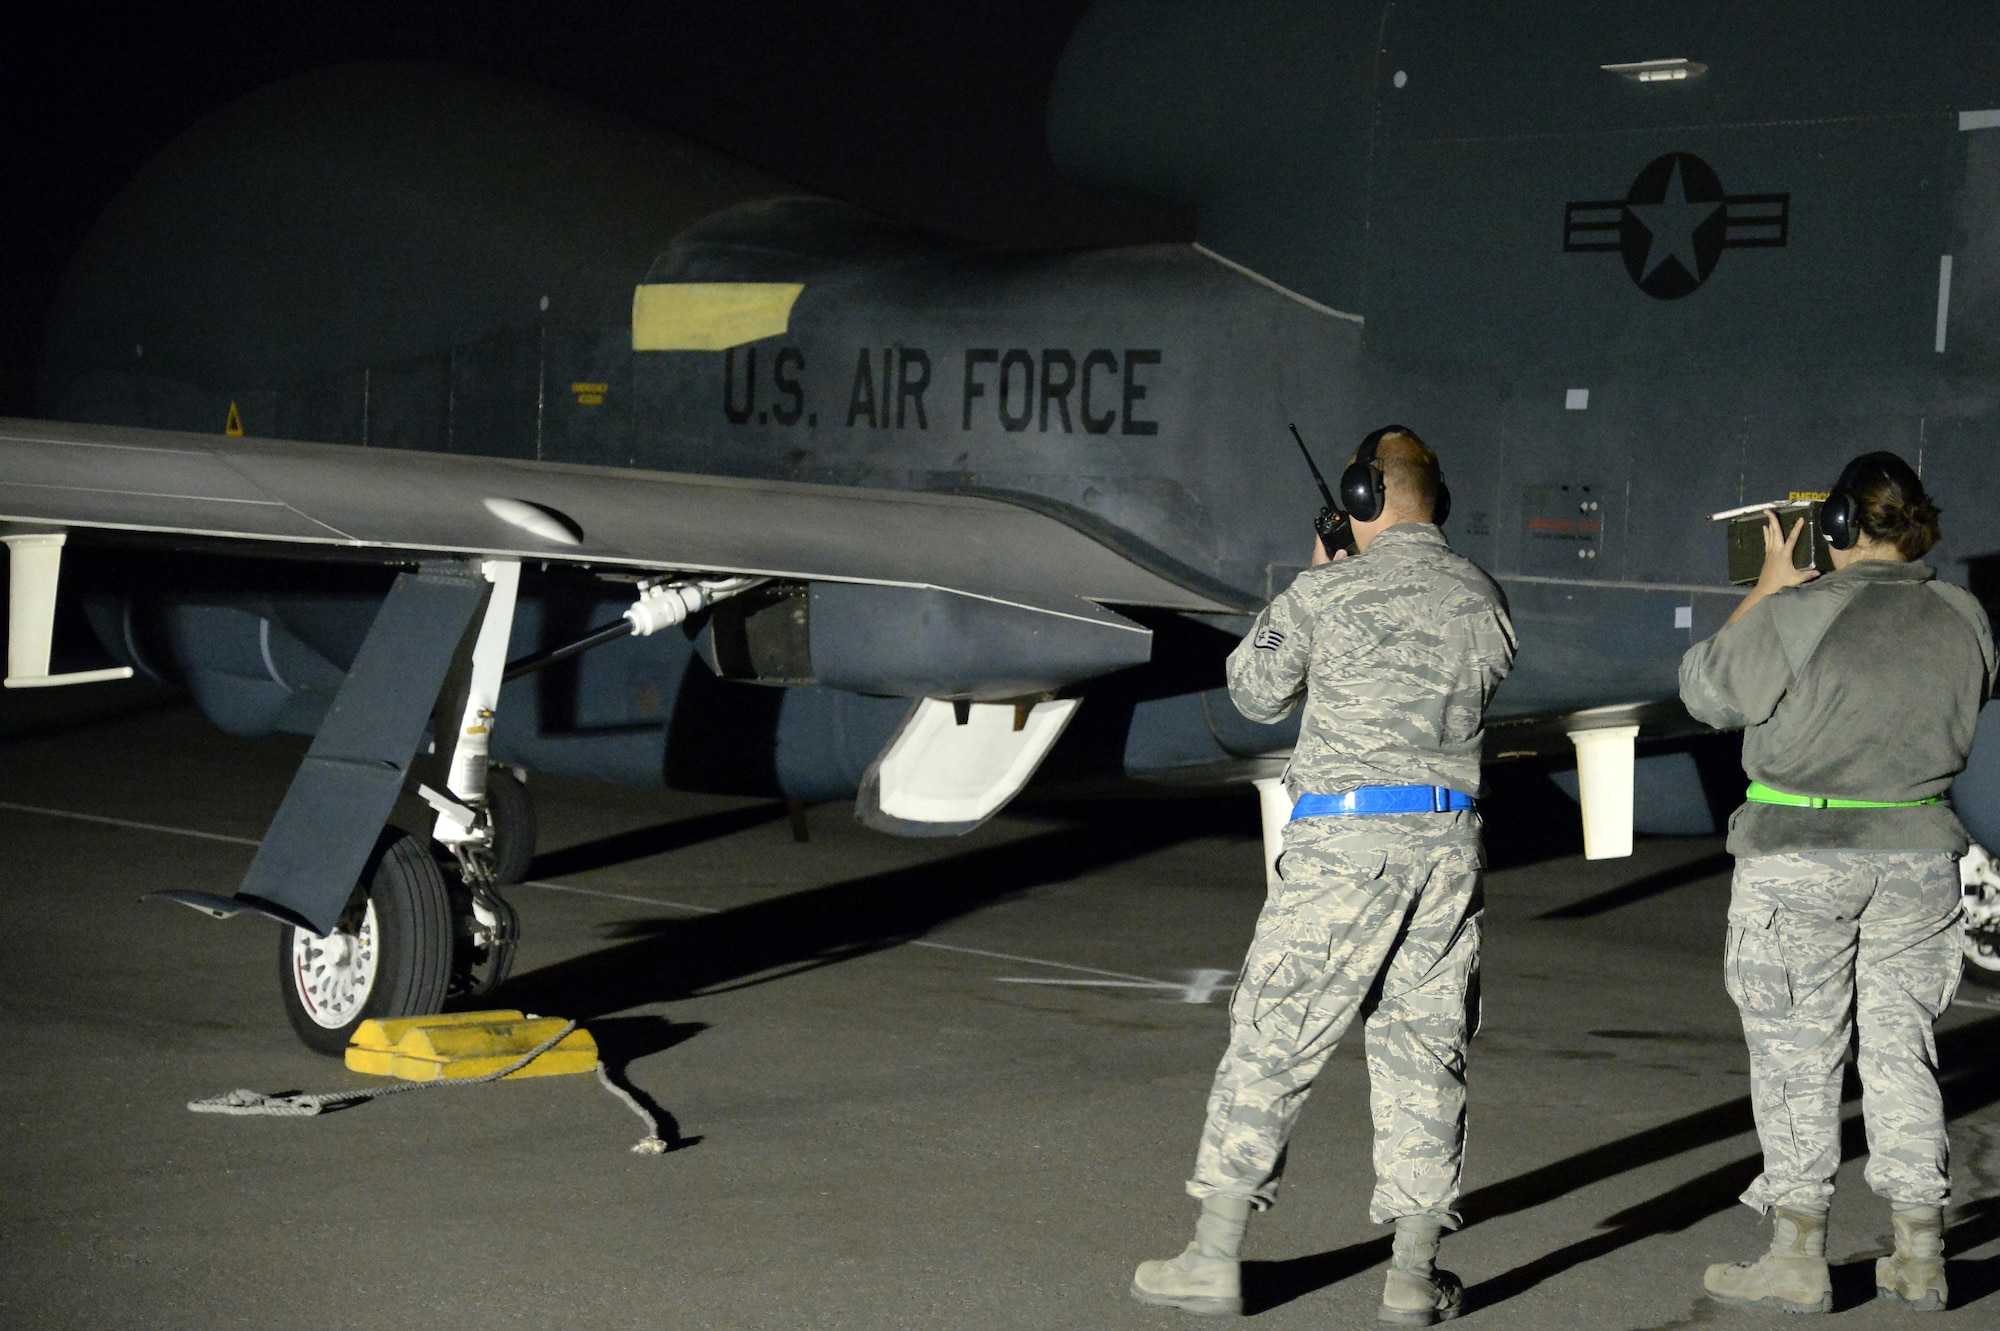 Staff Sgt. Paul, left, crew chief, and Airman 1st Class Casey, avionics specialist, verify operation of the Identification Friend or Foe system on a RQ-4 Global Hawk at an undisclosed location in Southwest Asia Mar. 7, 2015. A transponder is used to send a signal that requests the aircraft’s identification and the aircraft sends a signal back verifying the test was successful. Paul is currently deployed from Grand Forks Air Force Base, N.D., and is a native of Pittsburgh, Pa. Casey is currently deployed from Grand Forks Air Force Base, N.D. (U.S. Air Force photo/Tech. Sgt. Marie Brown)